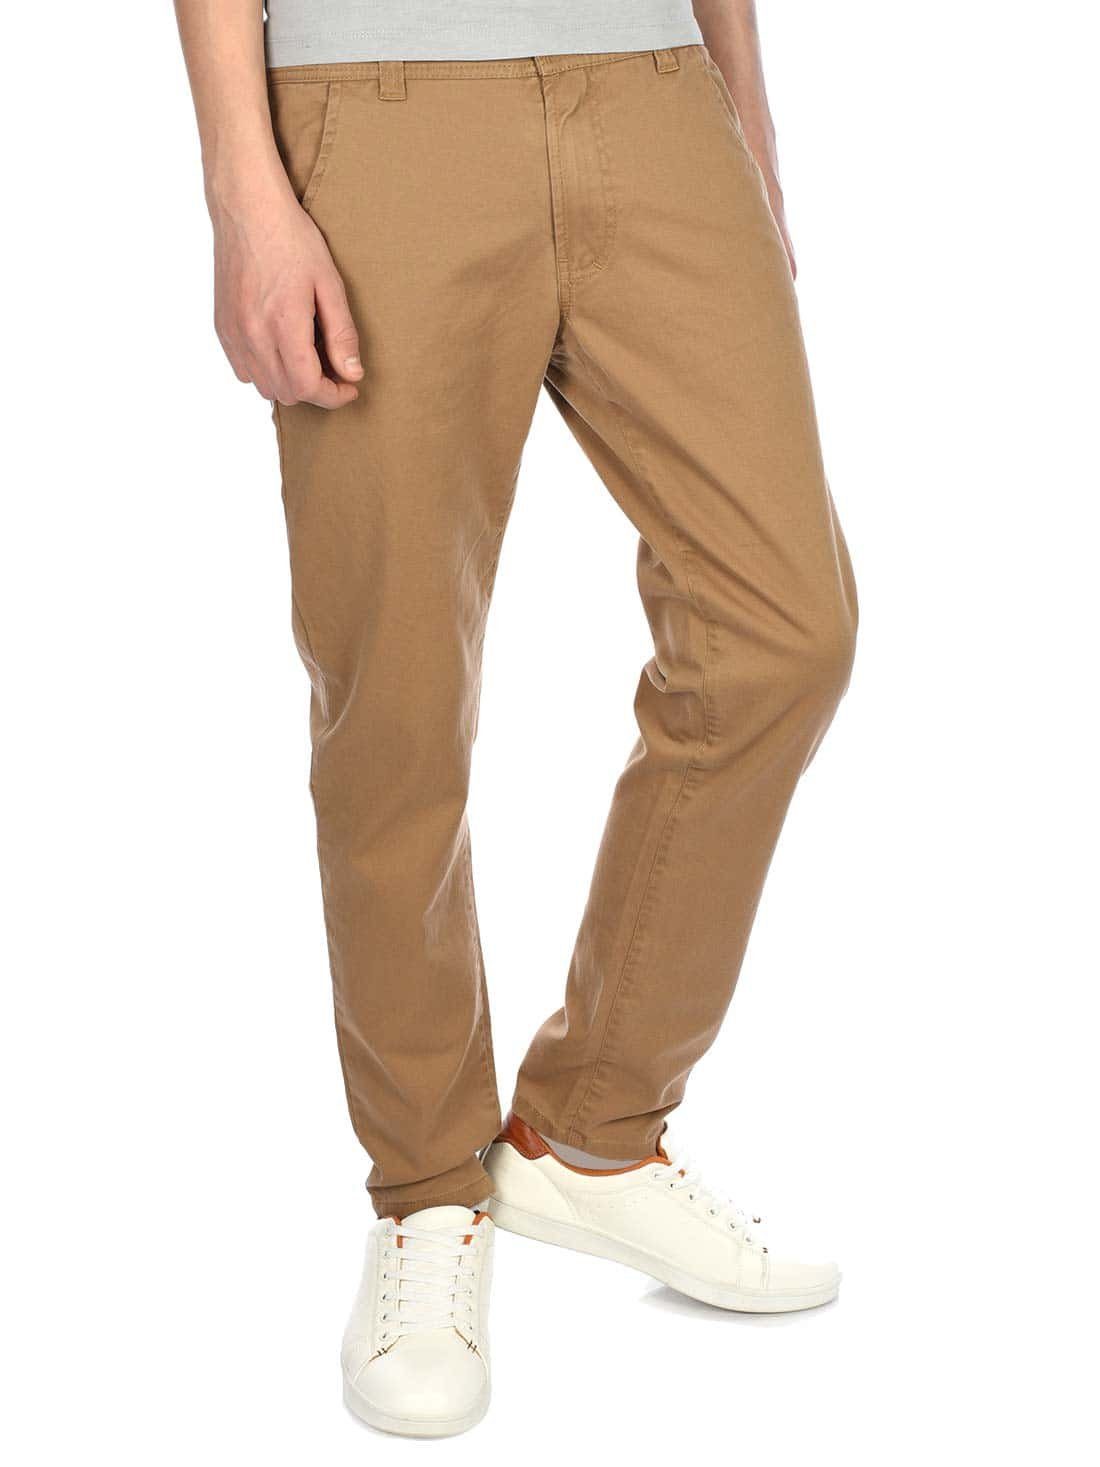 BEZLIT Chinohose Jungen Chino (1-tlg) Hose Beige casual